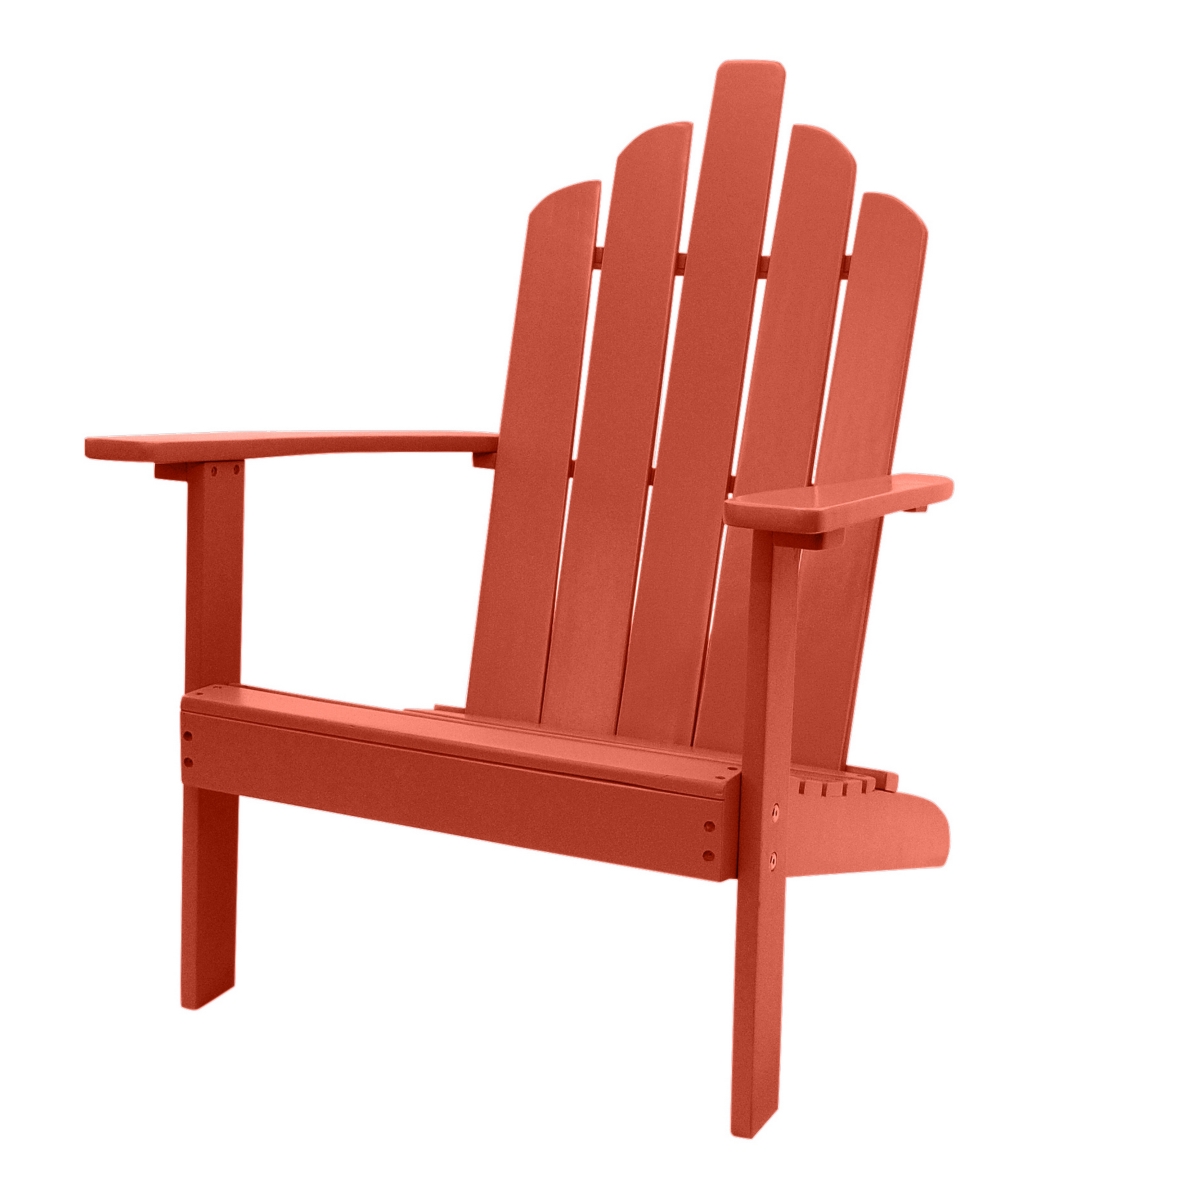 2003031 Outdoor Patio Wood Adirondack Chair, Red